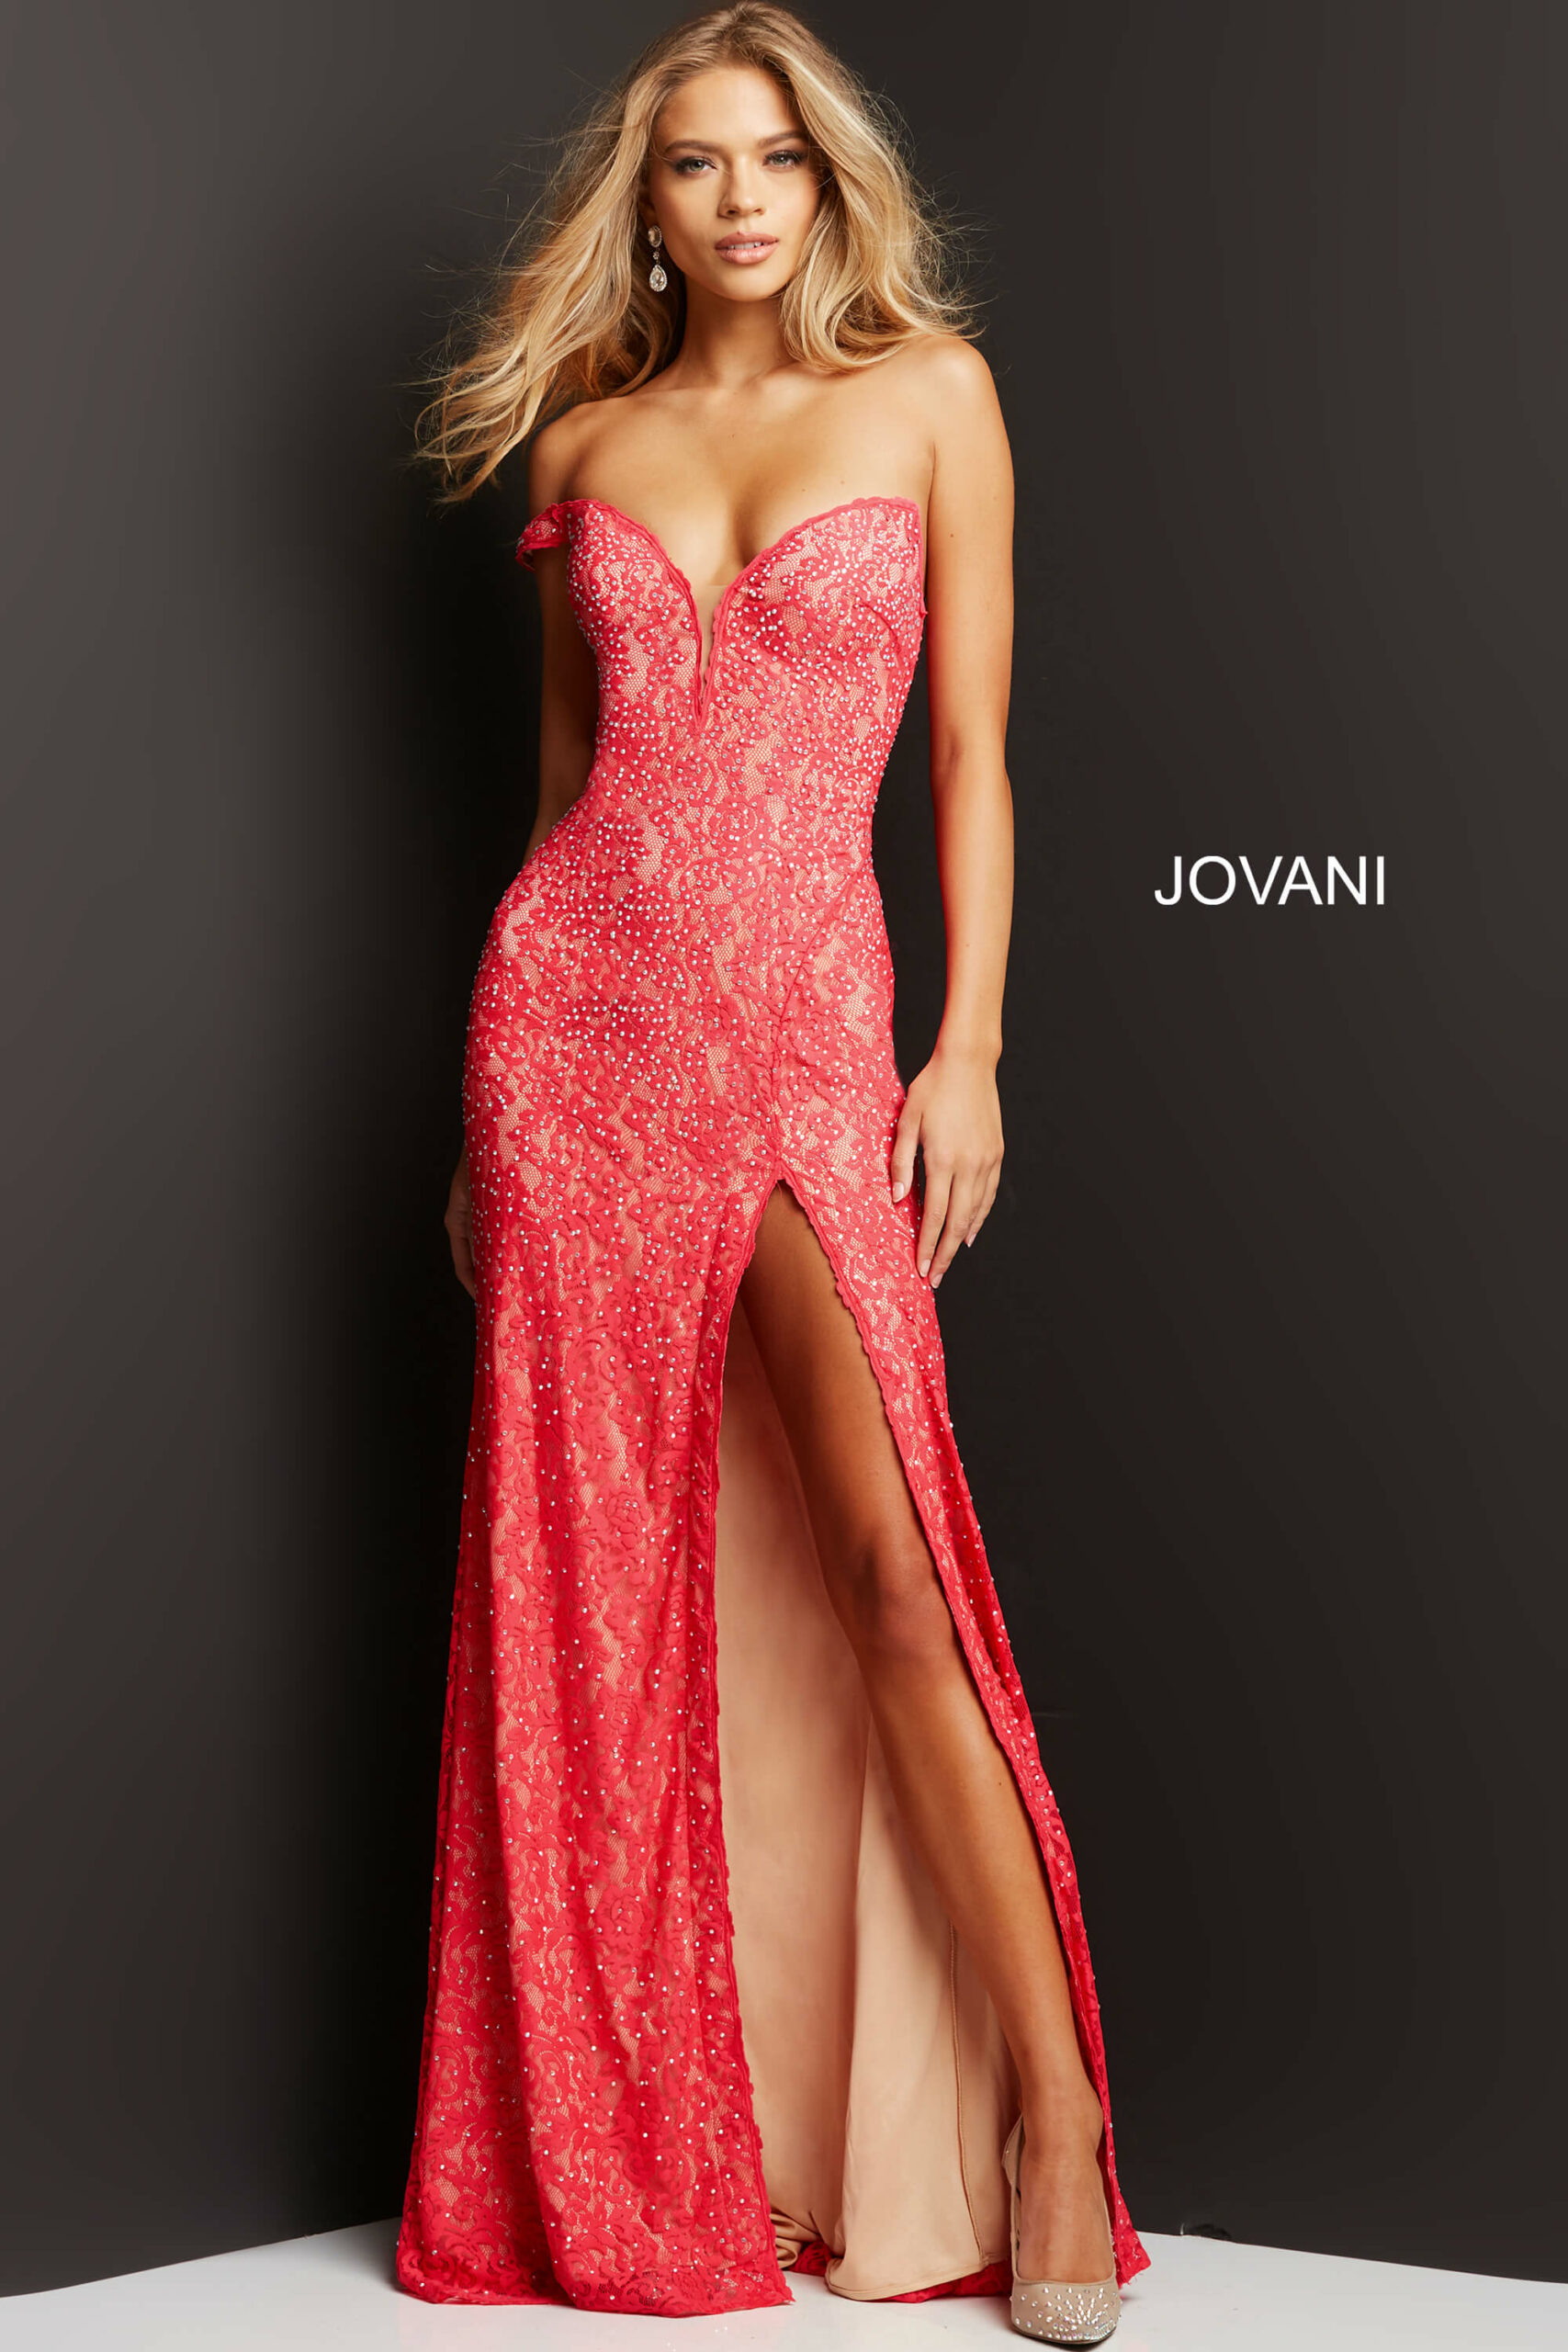 Watermelon Embellished High Slit Prom Gown